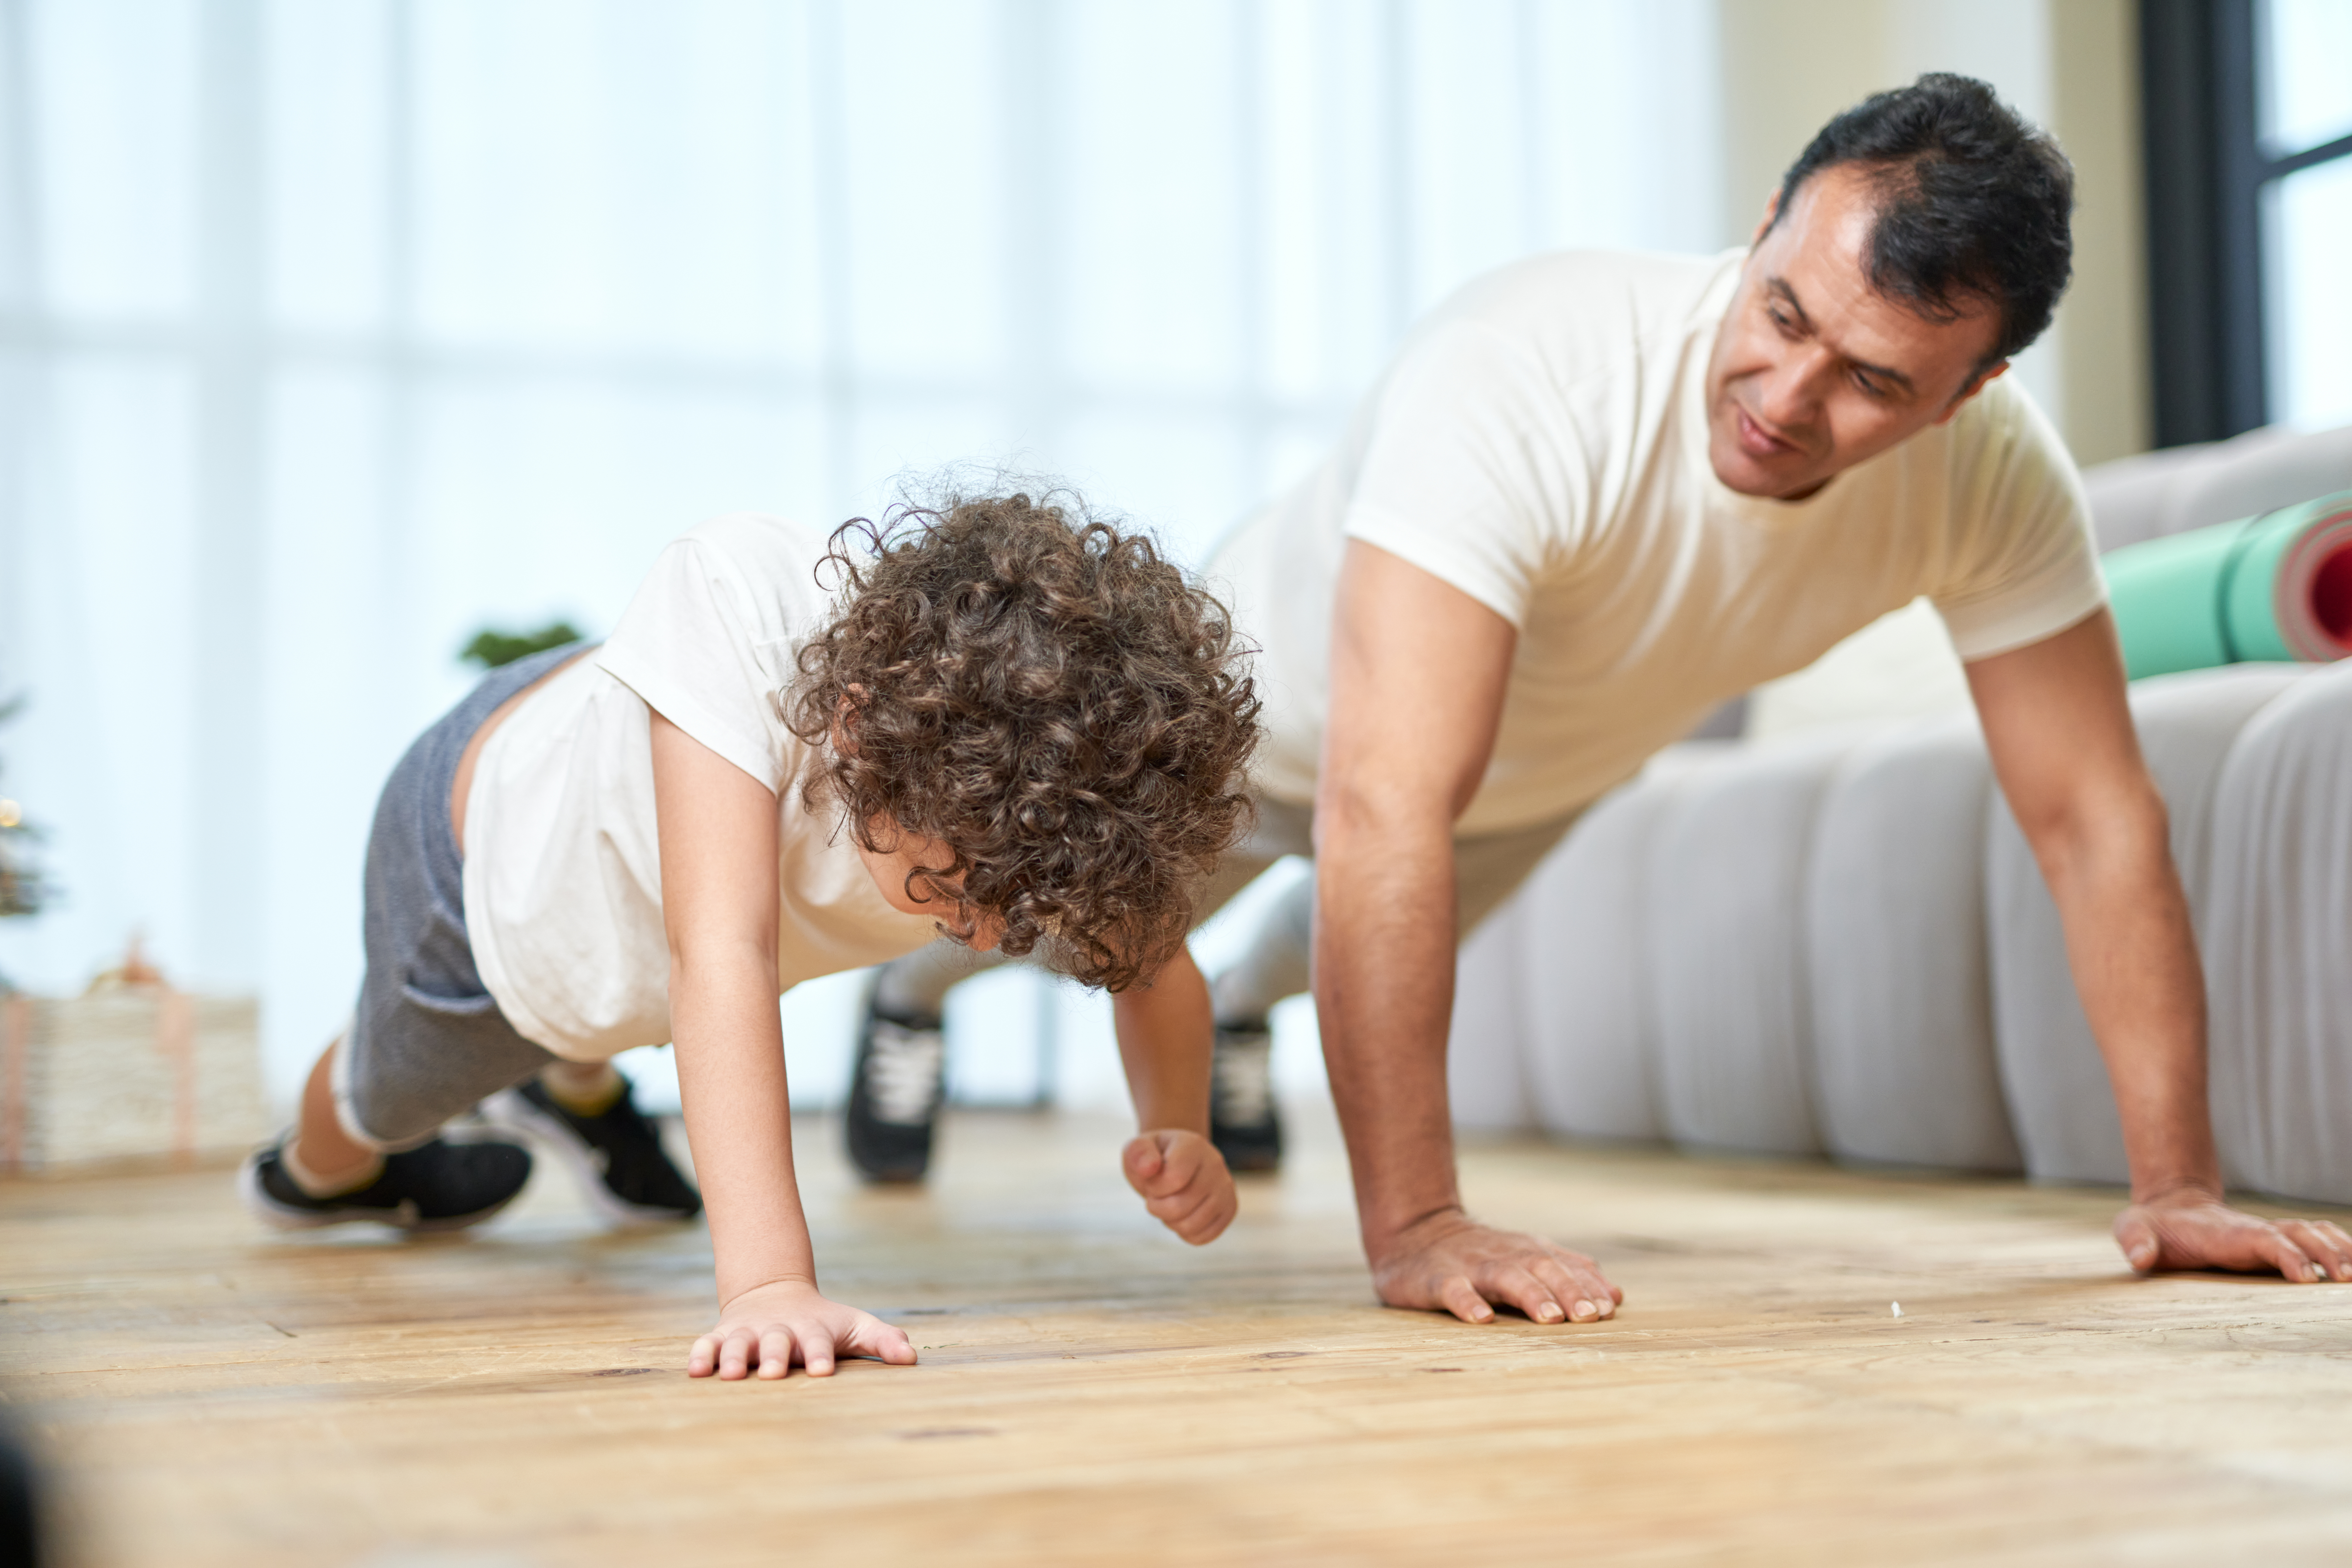 Training at Home. Sportive latin middle aged father teaching his son doing push ups while spending time together at home